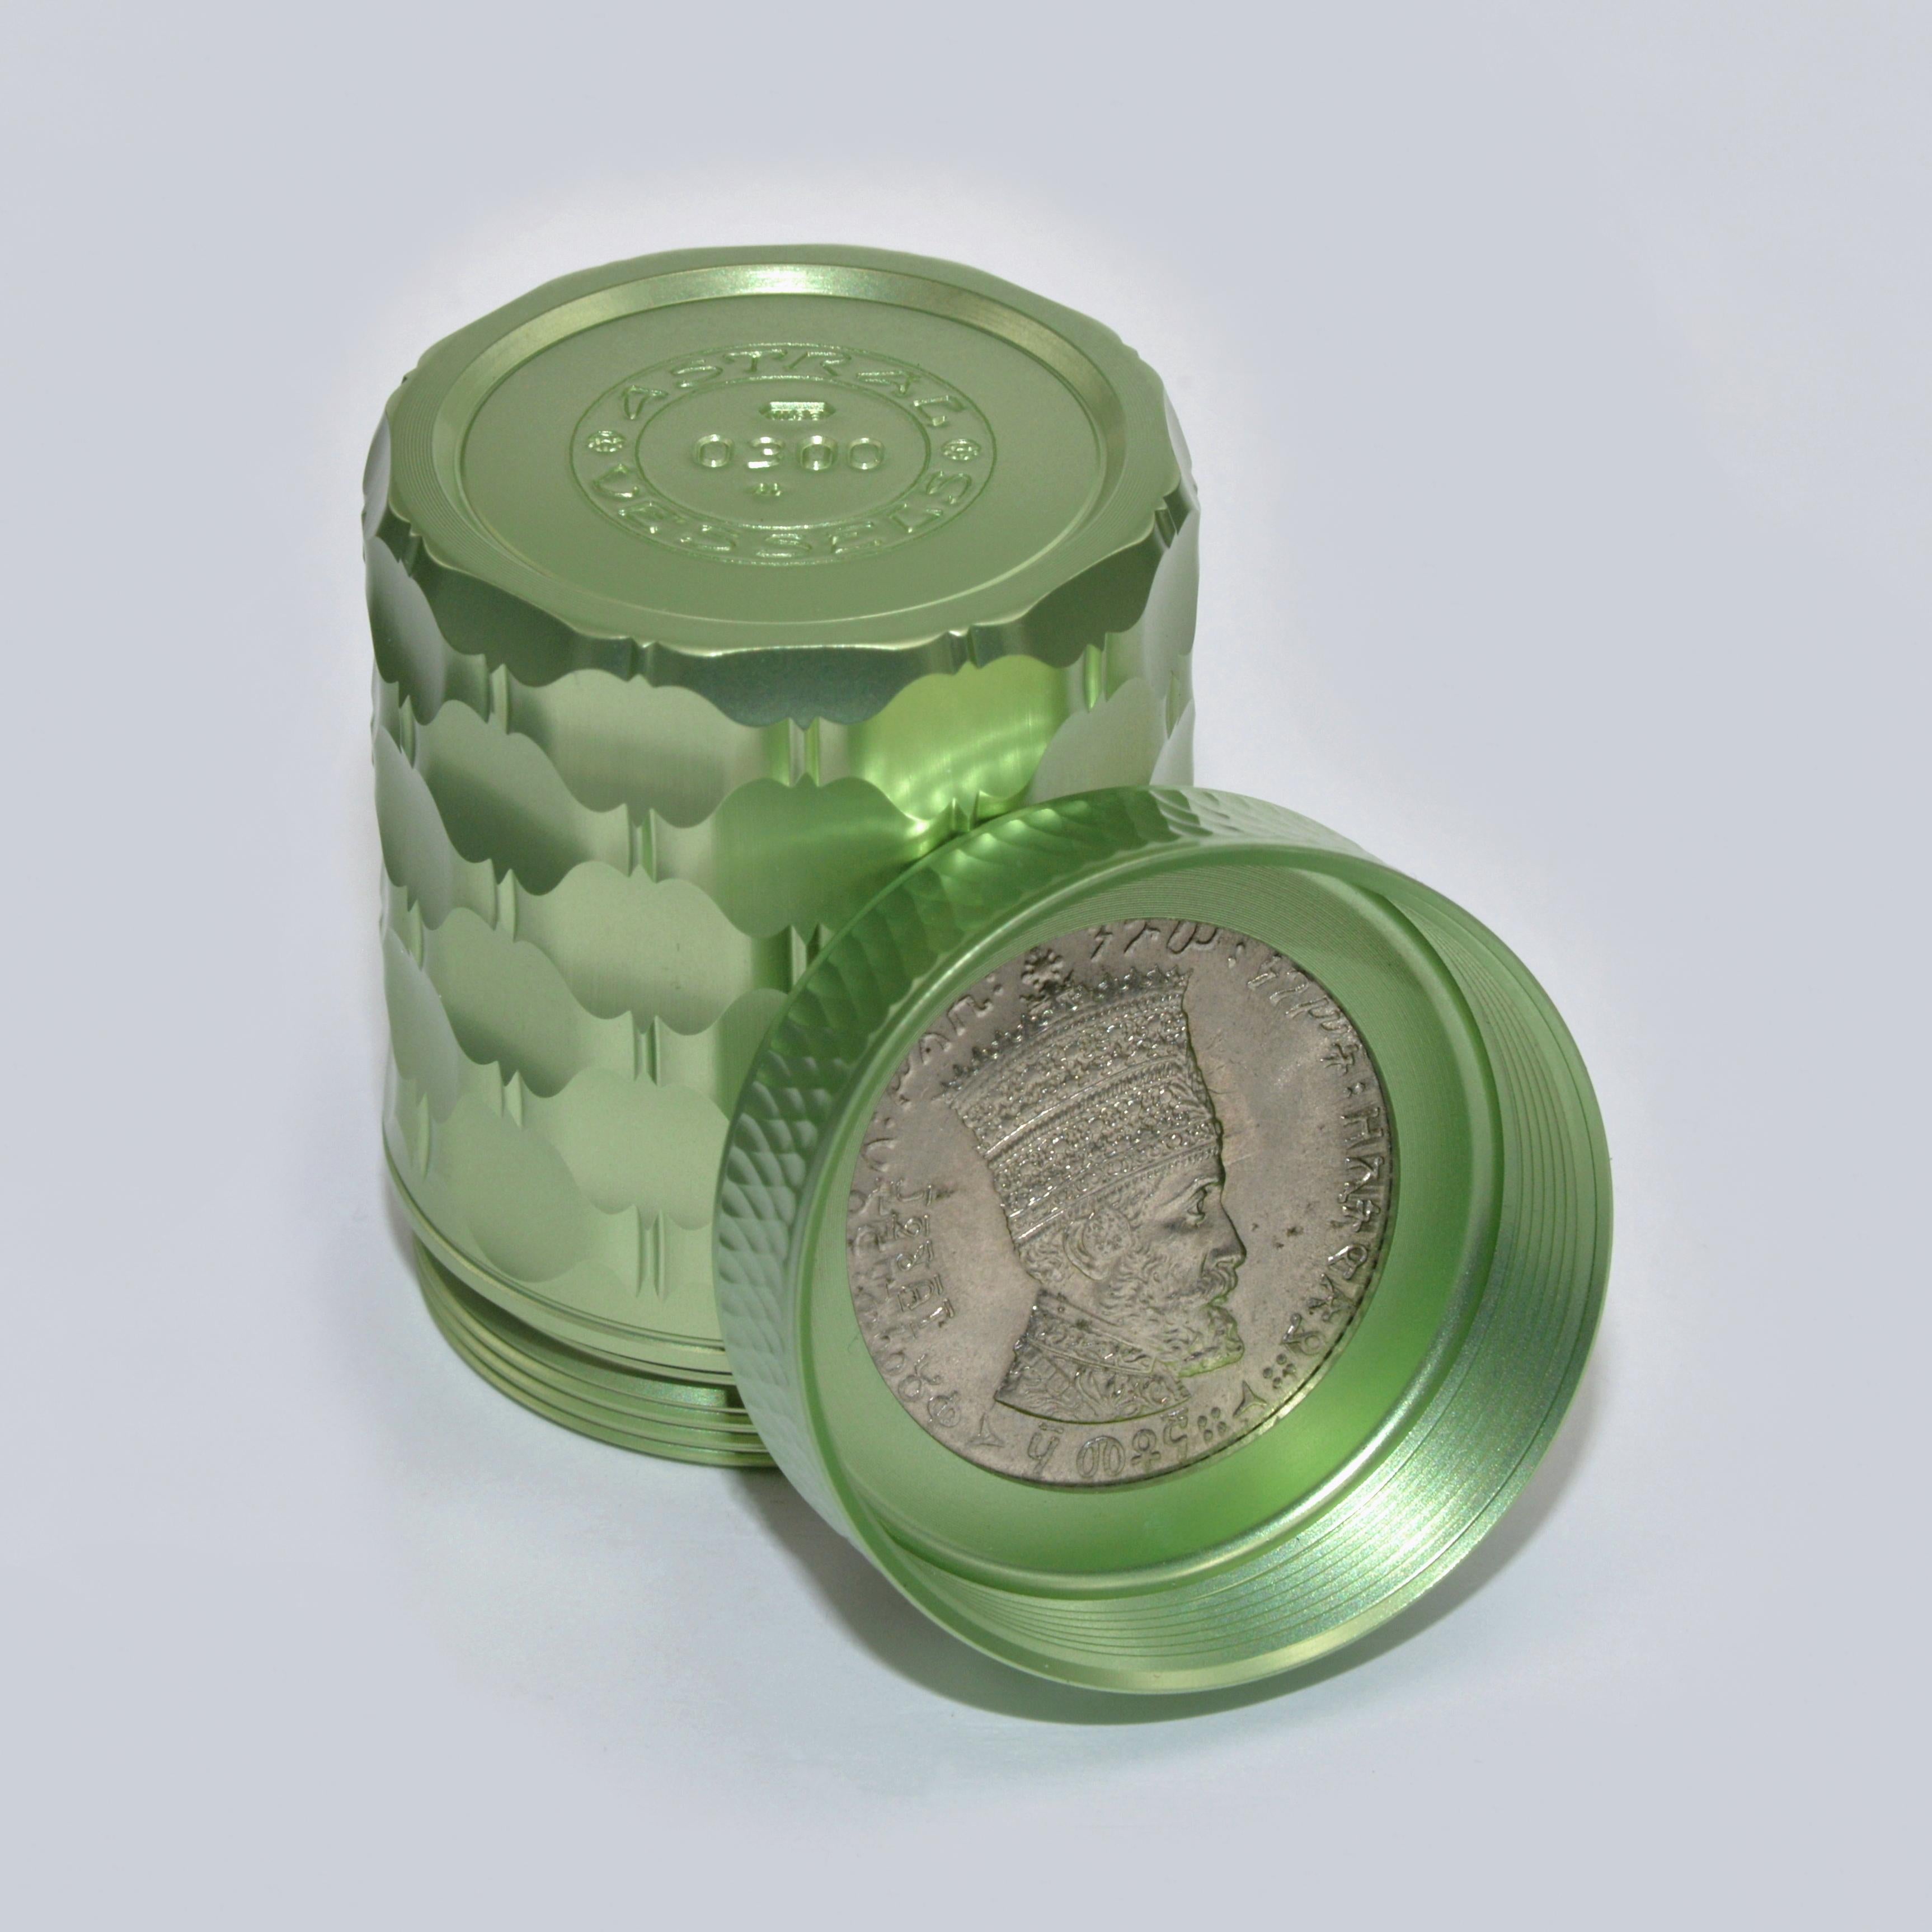 A genuine Ethiopian 50 Matonas coin showing the triumphant Lion of Judah has been inset into the top. The obverse is visible on the inside of the cap, revealing the portrait of Emperor Haille Selassie II when the vessel is opened.
 
This sparkling